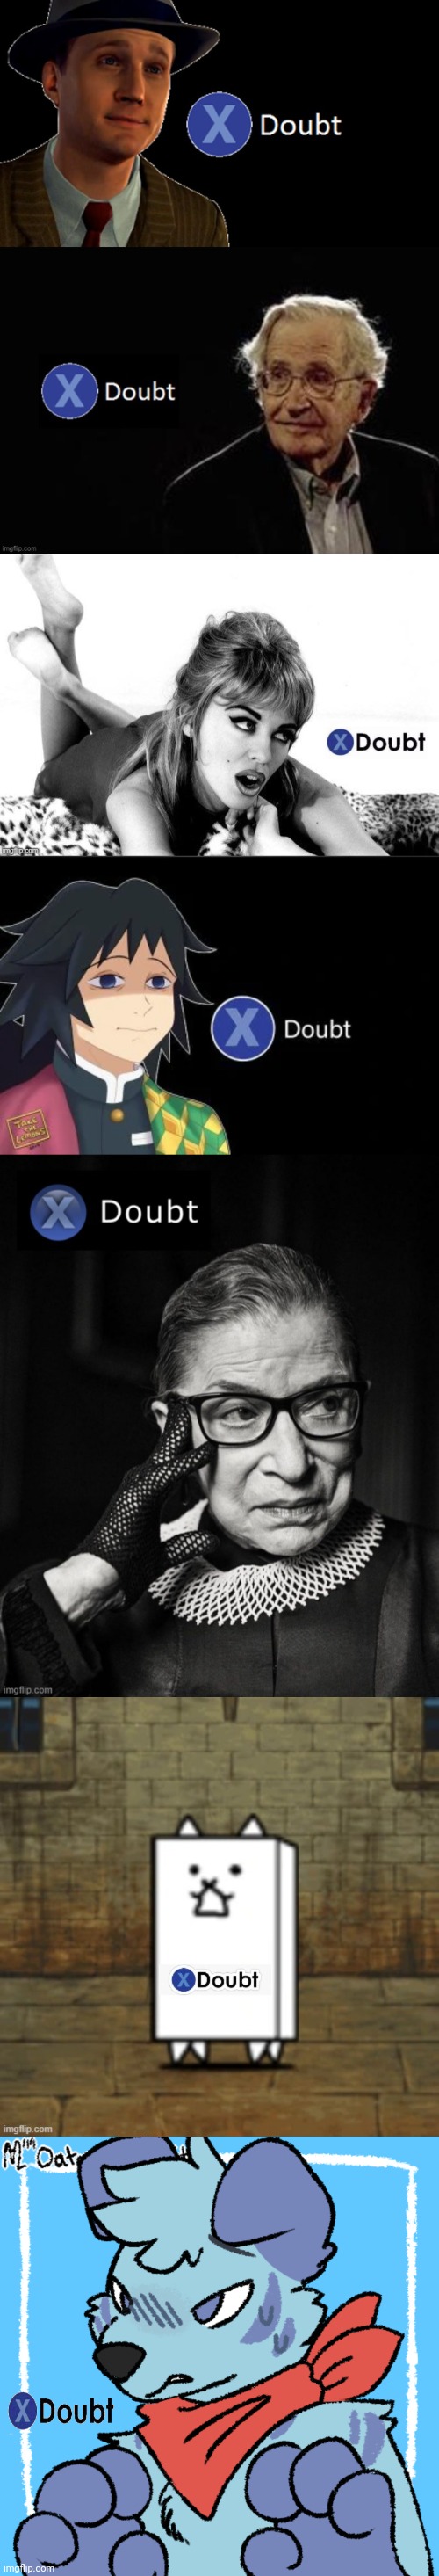 image tagged in l a noire press x to doubt,x doubt chomsky,kylie x doubt 9,giyu x doubt,x doubt ruth bader ginsburg,wall cat doubt | made w/ Imgflip meme maker